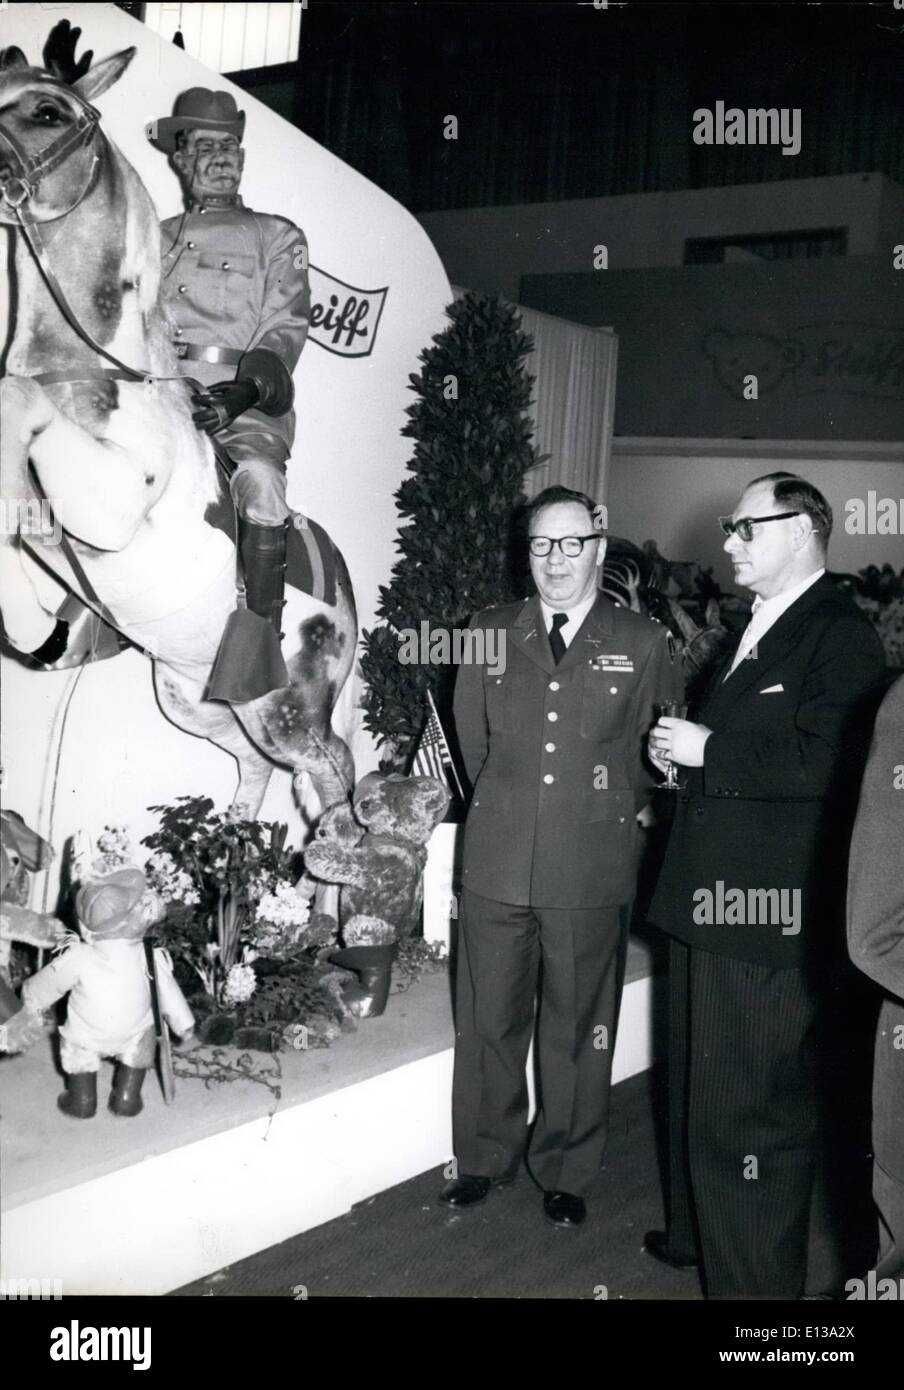 Feb. 29, 2012 - Lieutenant-Colonel Kuschner and Mr. Otto Steiff in front of the Roosevelt monument in the exhibition booth of the firm Steiff. Stock Photo